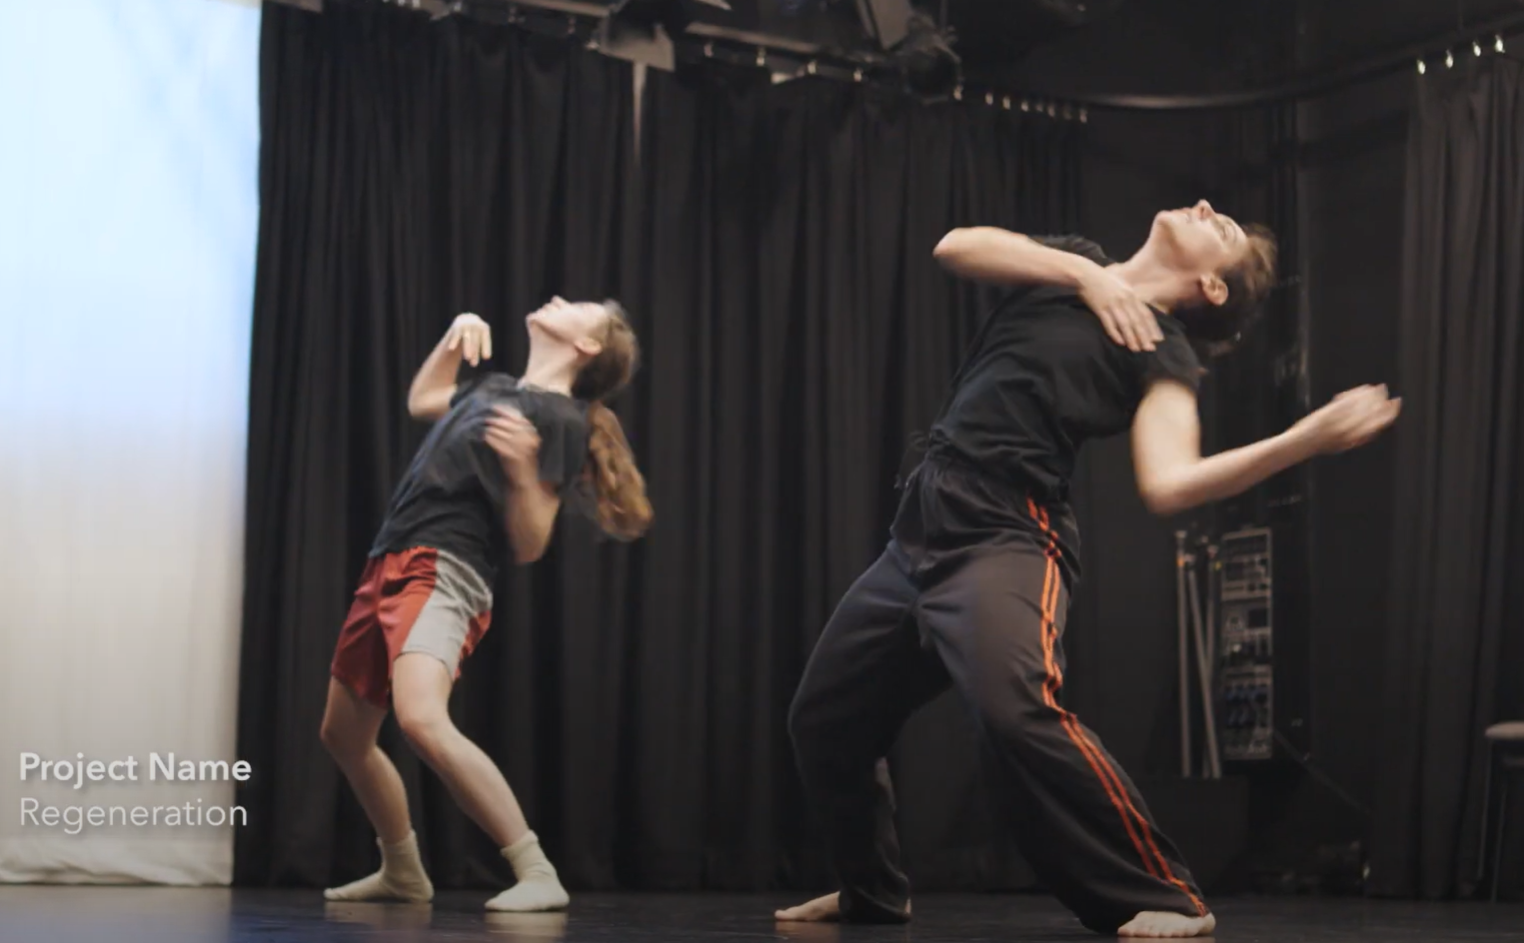 Dancers expressing Scientific research through movement, Regeneration Project